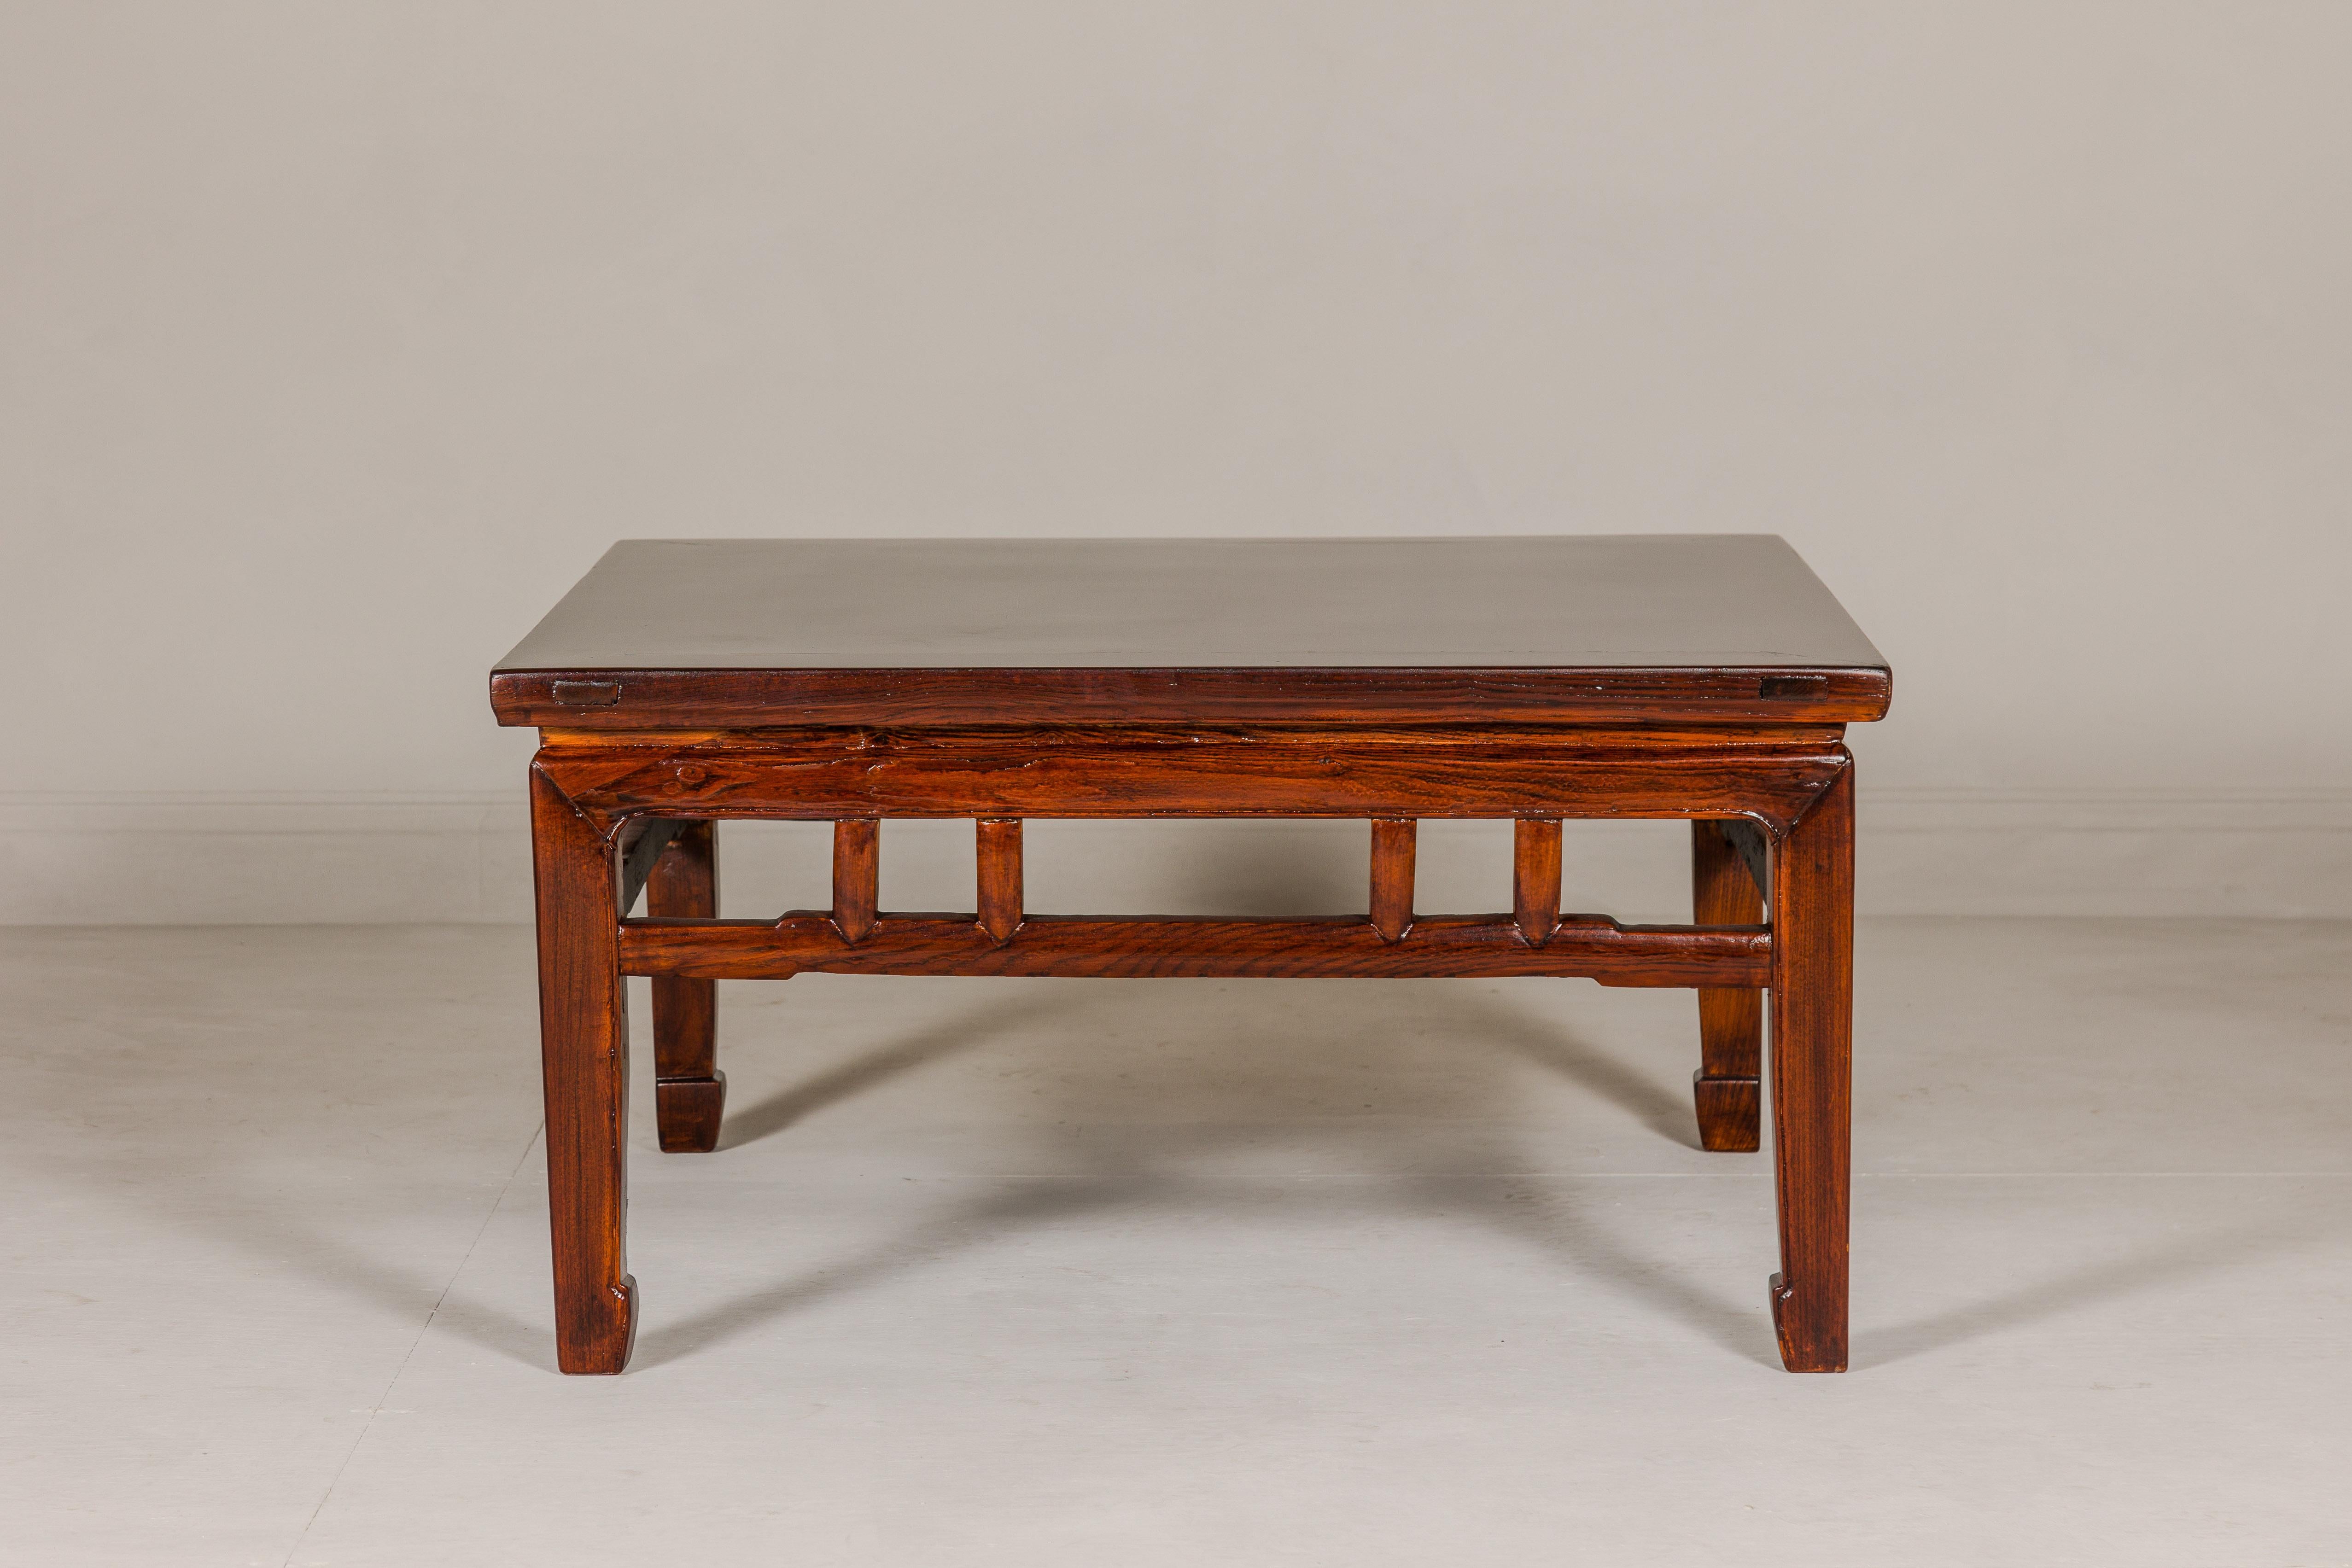 Chinese Low Square Coffee Table with Brown Lacquer, Horse Hoof Legs, Humpback Stretcher  For Sale